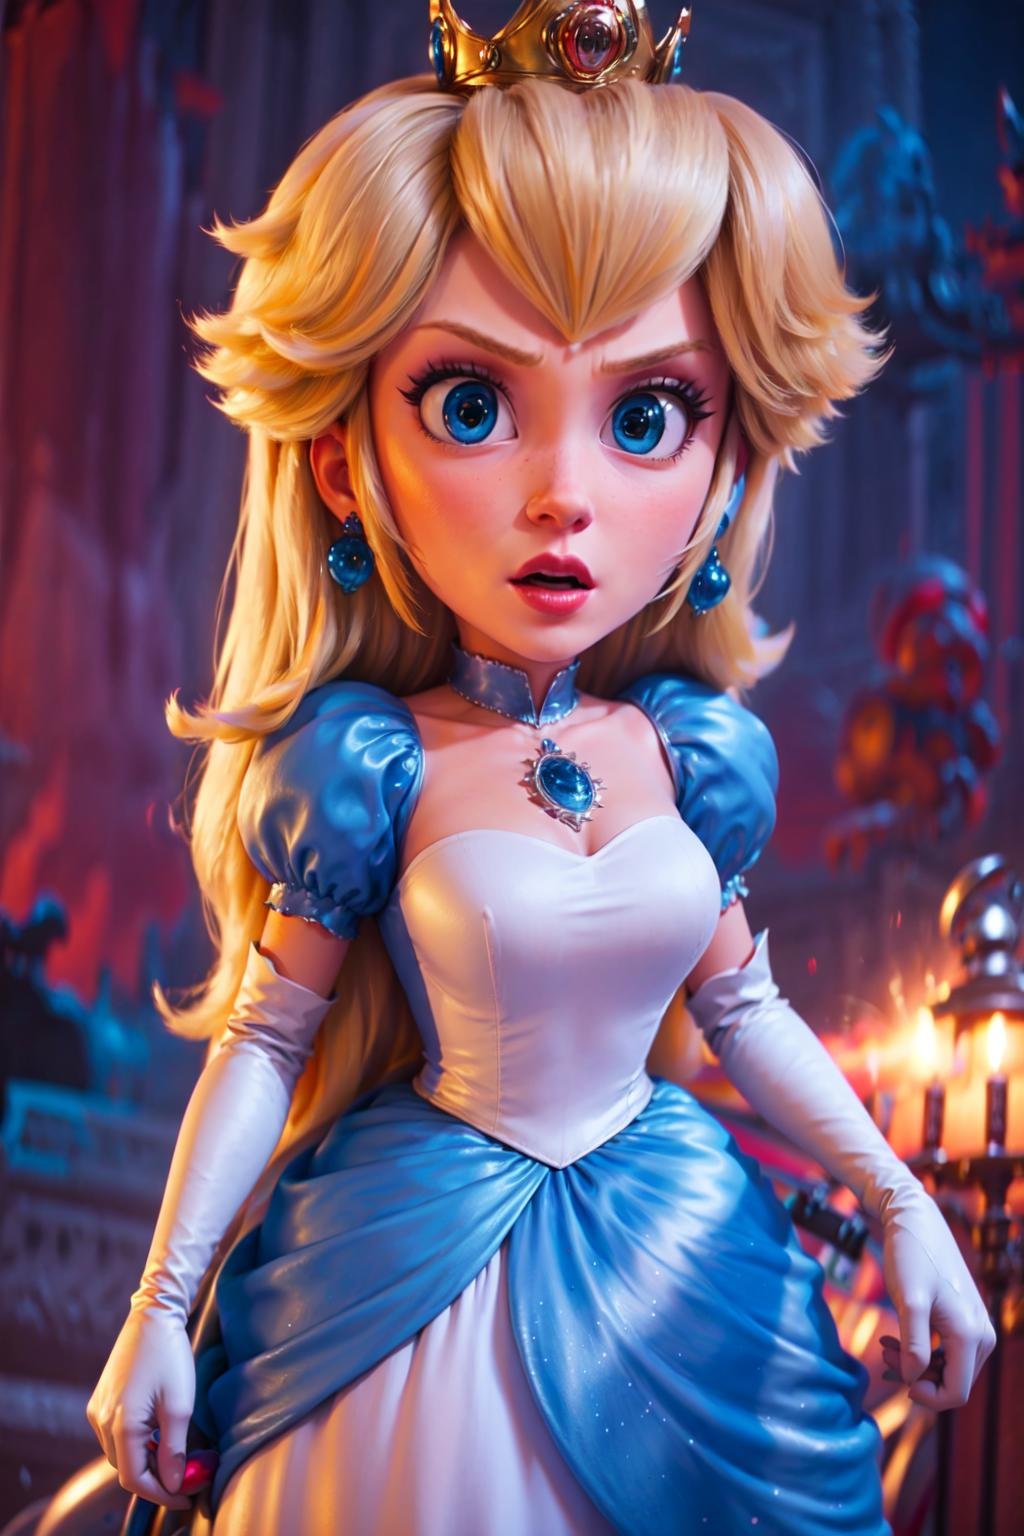 <lyco:SM(120R):1>Princess Peach wearing an ice outfit in the style of SM